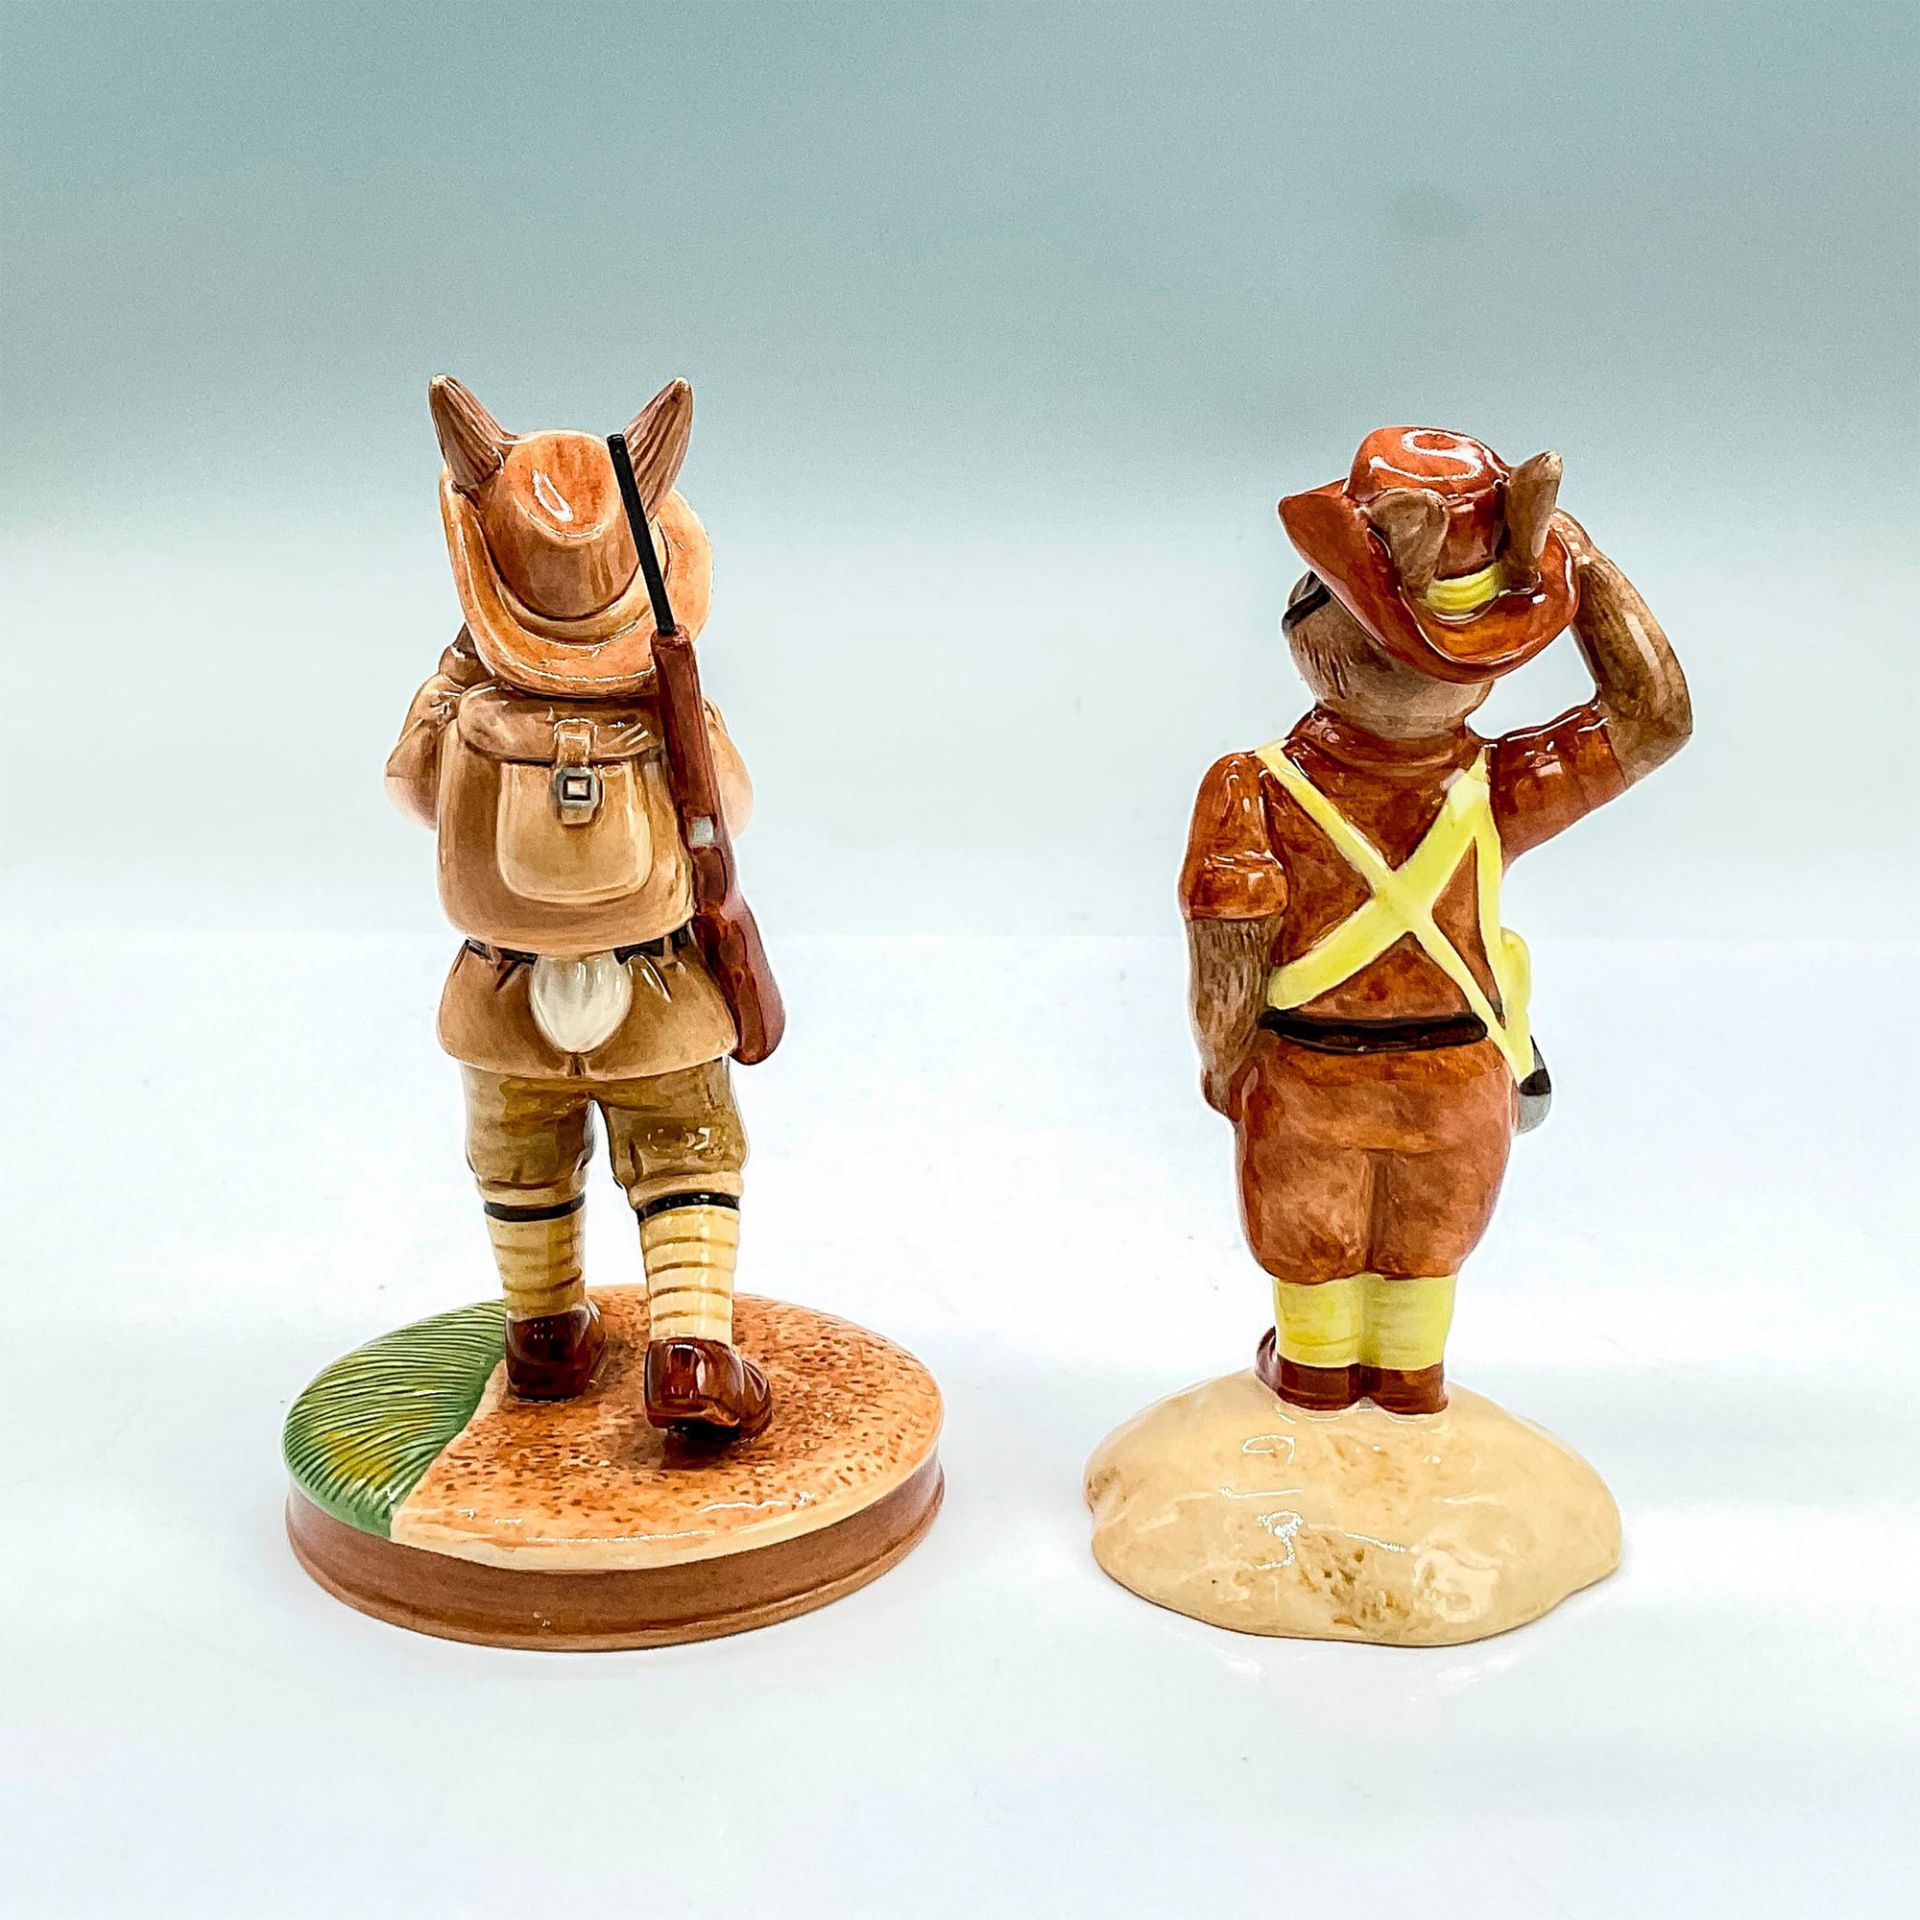 2pc Royal Doulton Bunnykins Figurines, Coo-ee + Digger - Image 2 of 3